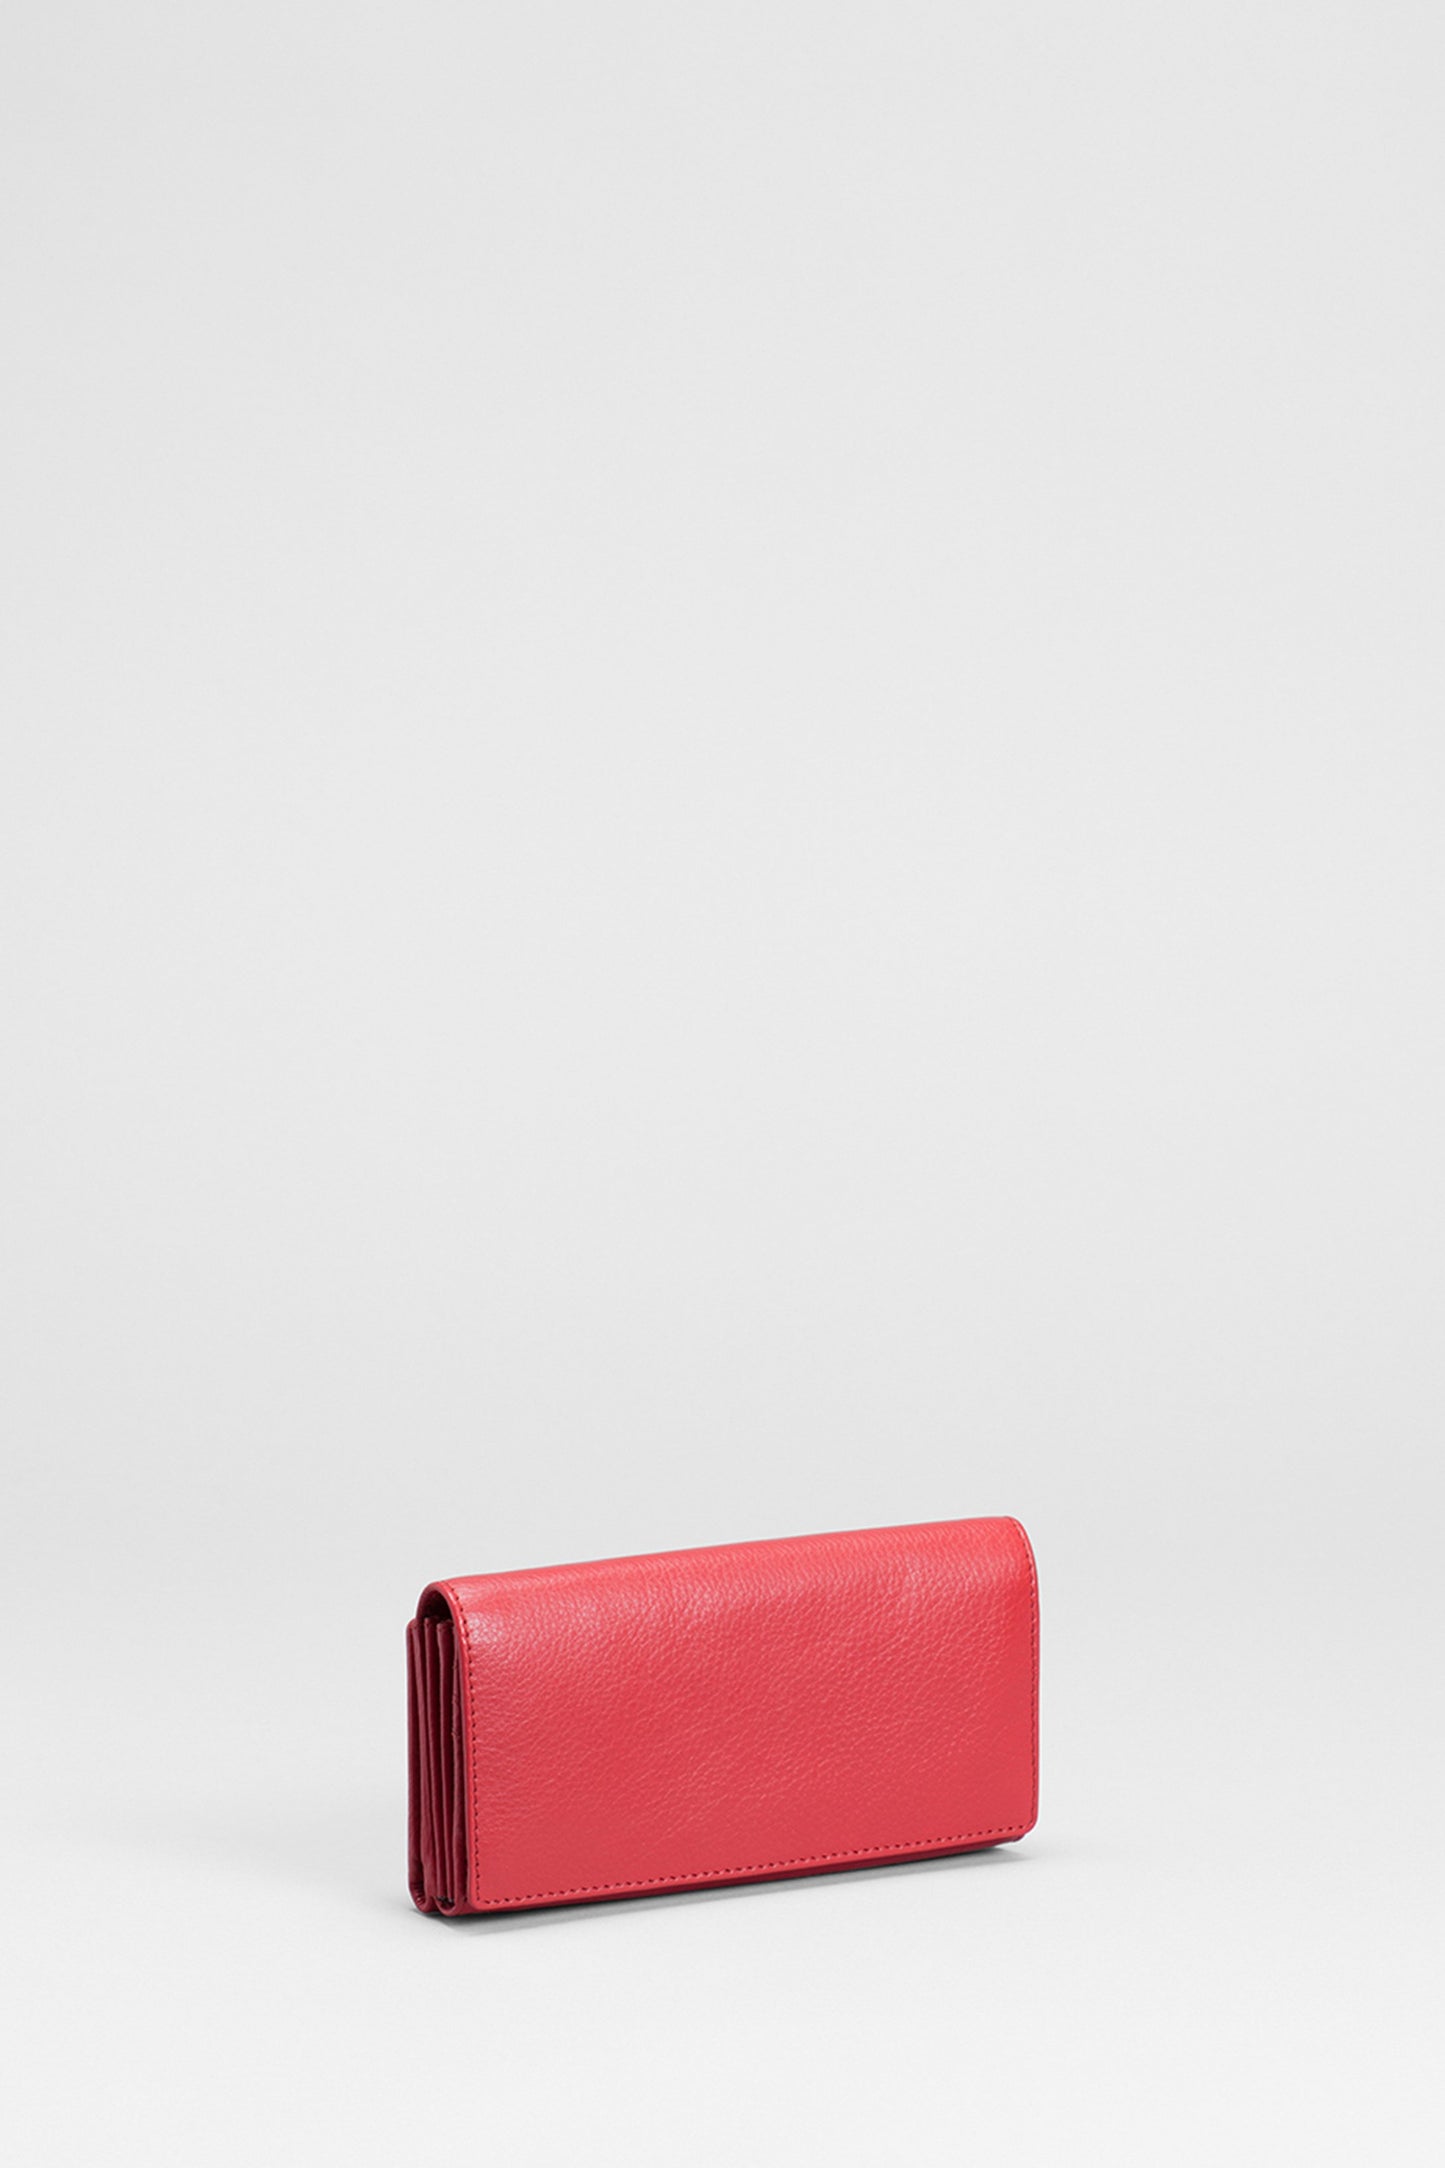 Leone Colourful Leather Wallet Front Angled RED